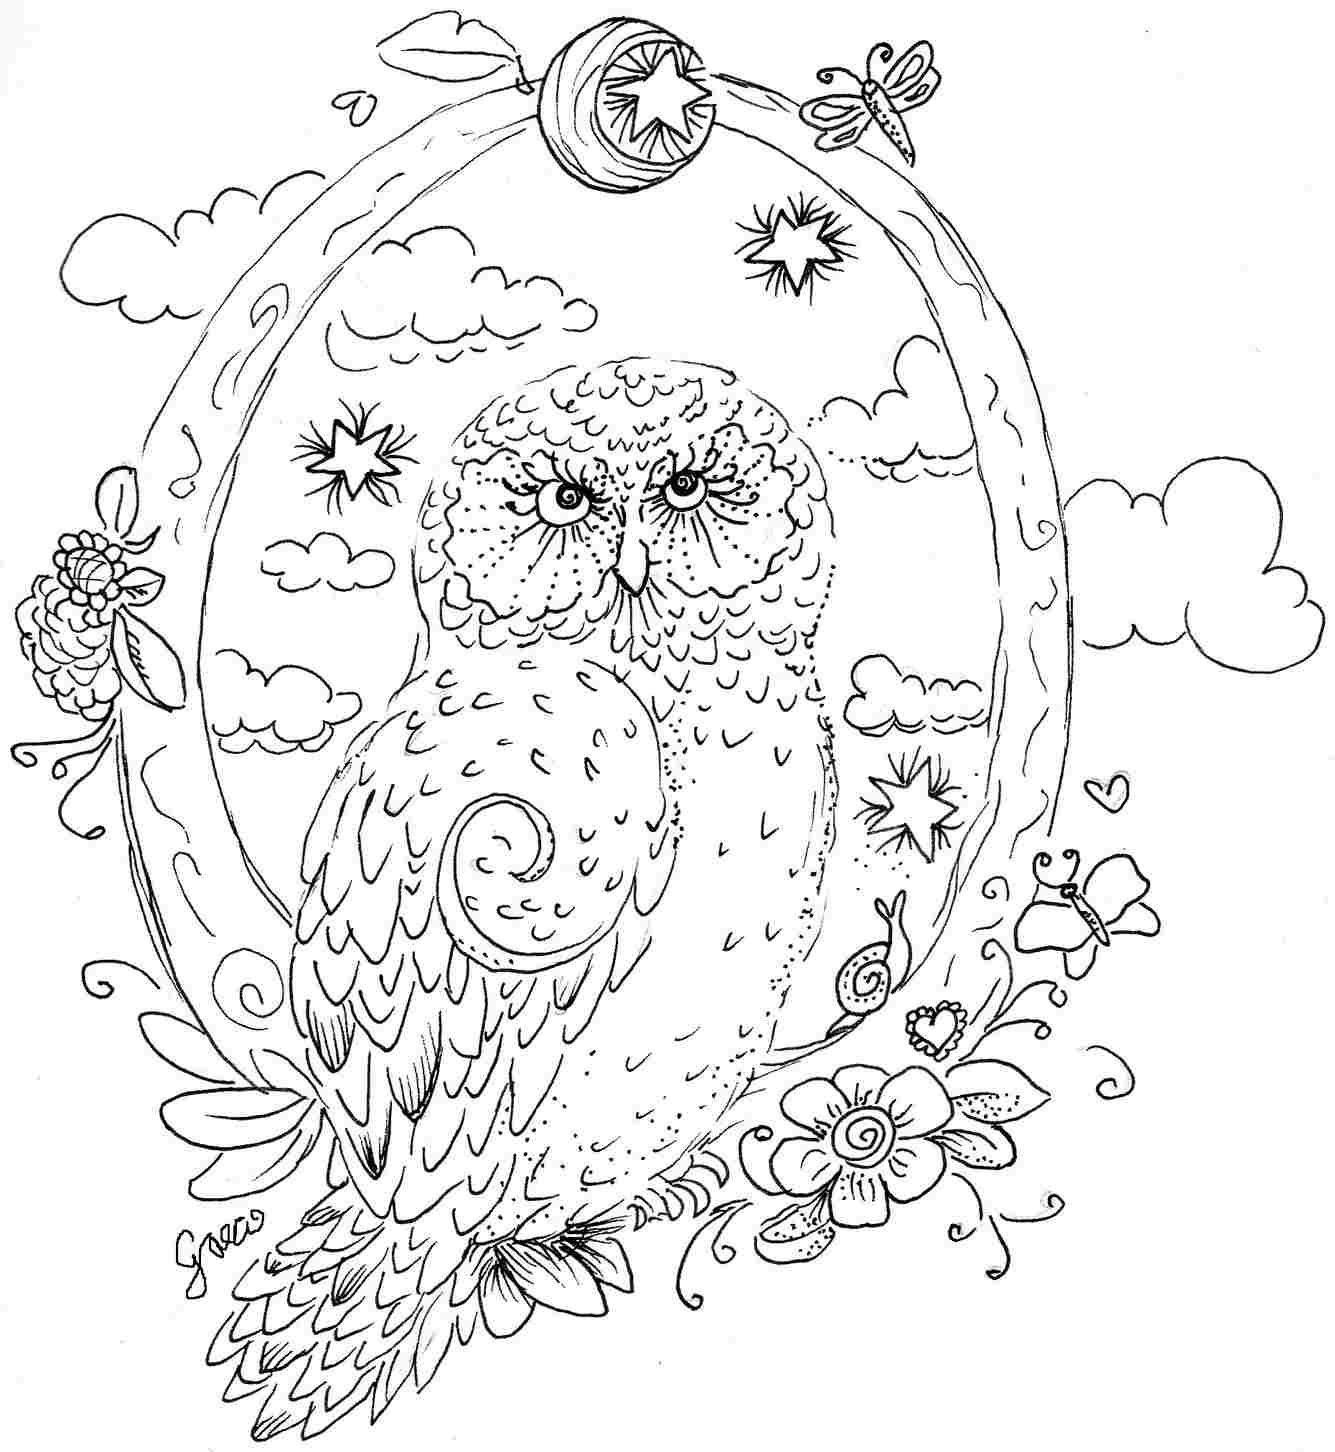 Hard Coloring Pages For Boys
 Pics For Coloring Pages For Adults Difficult Owls